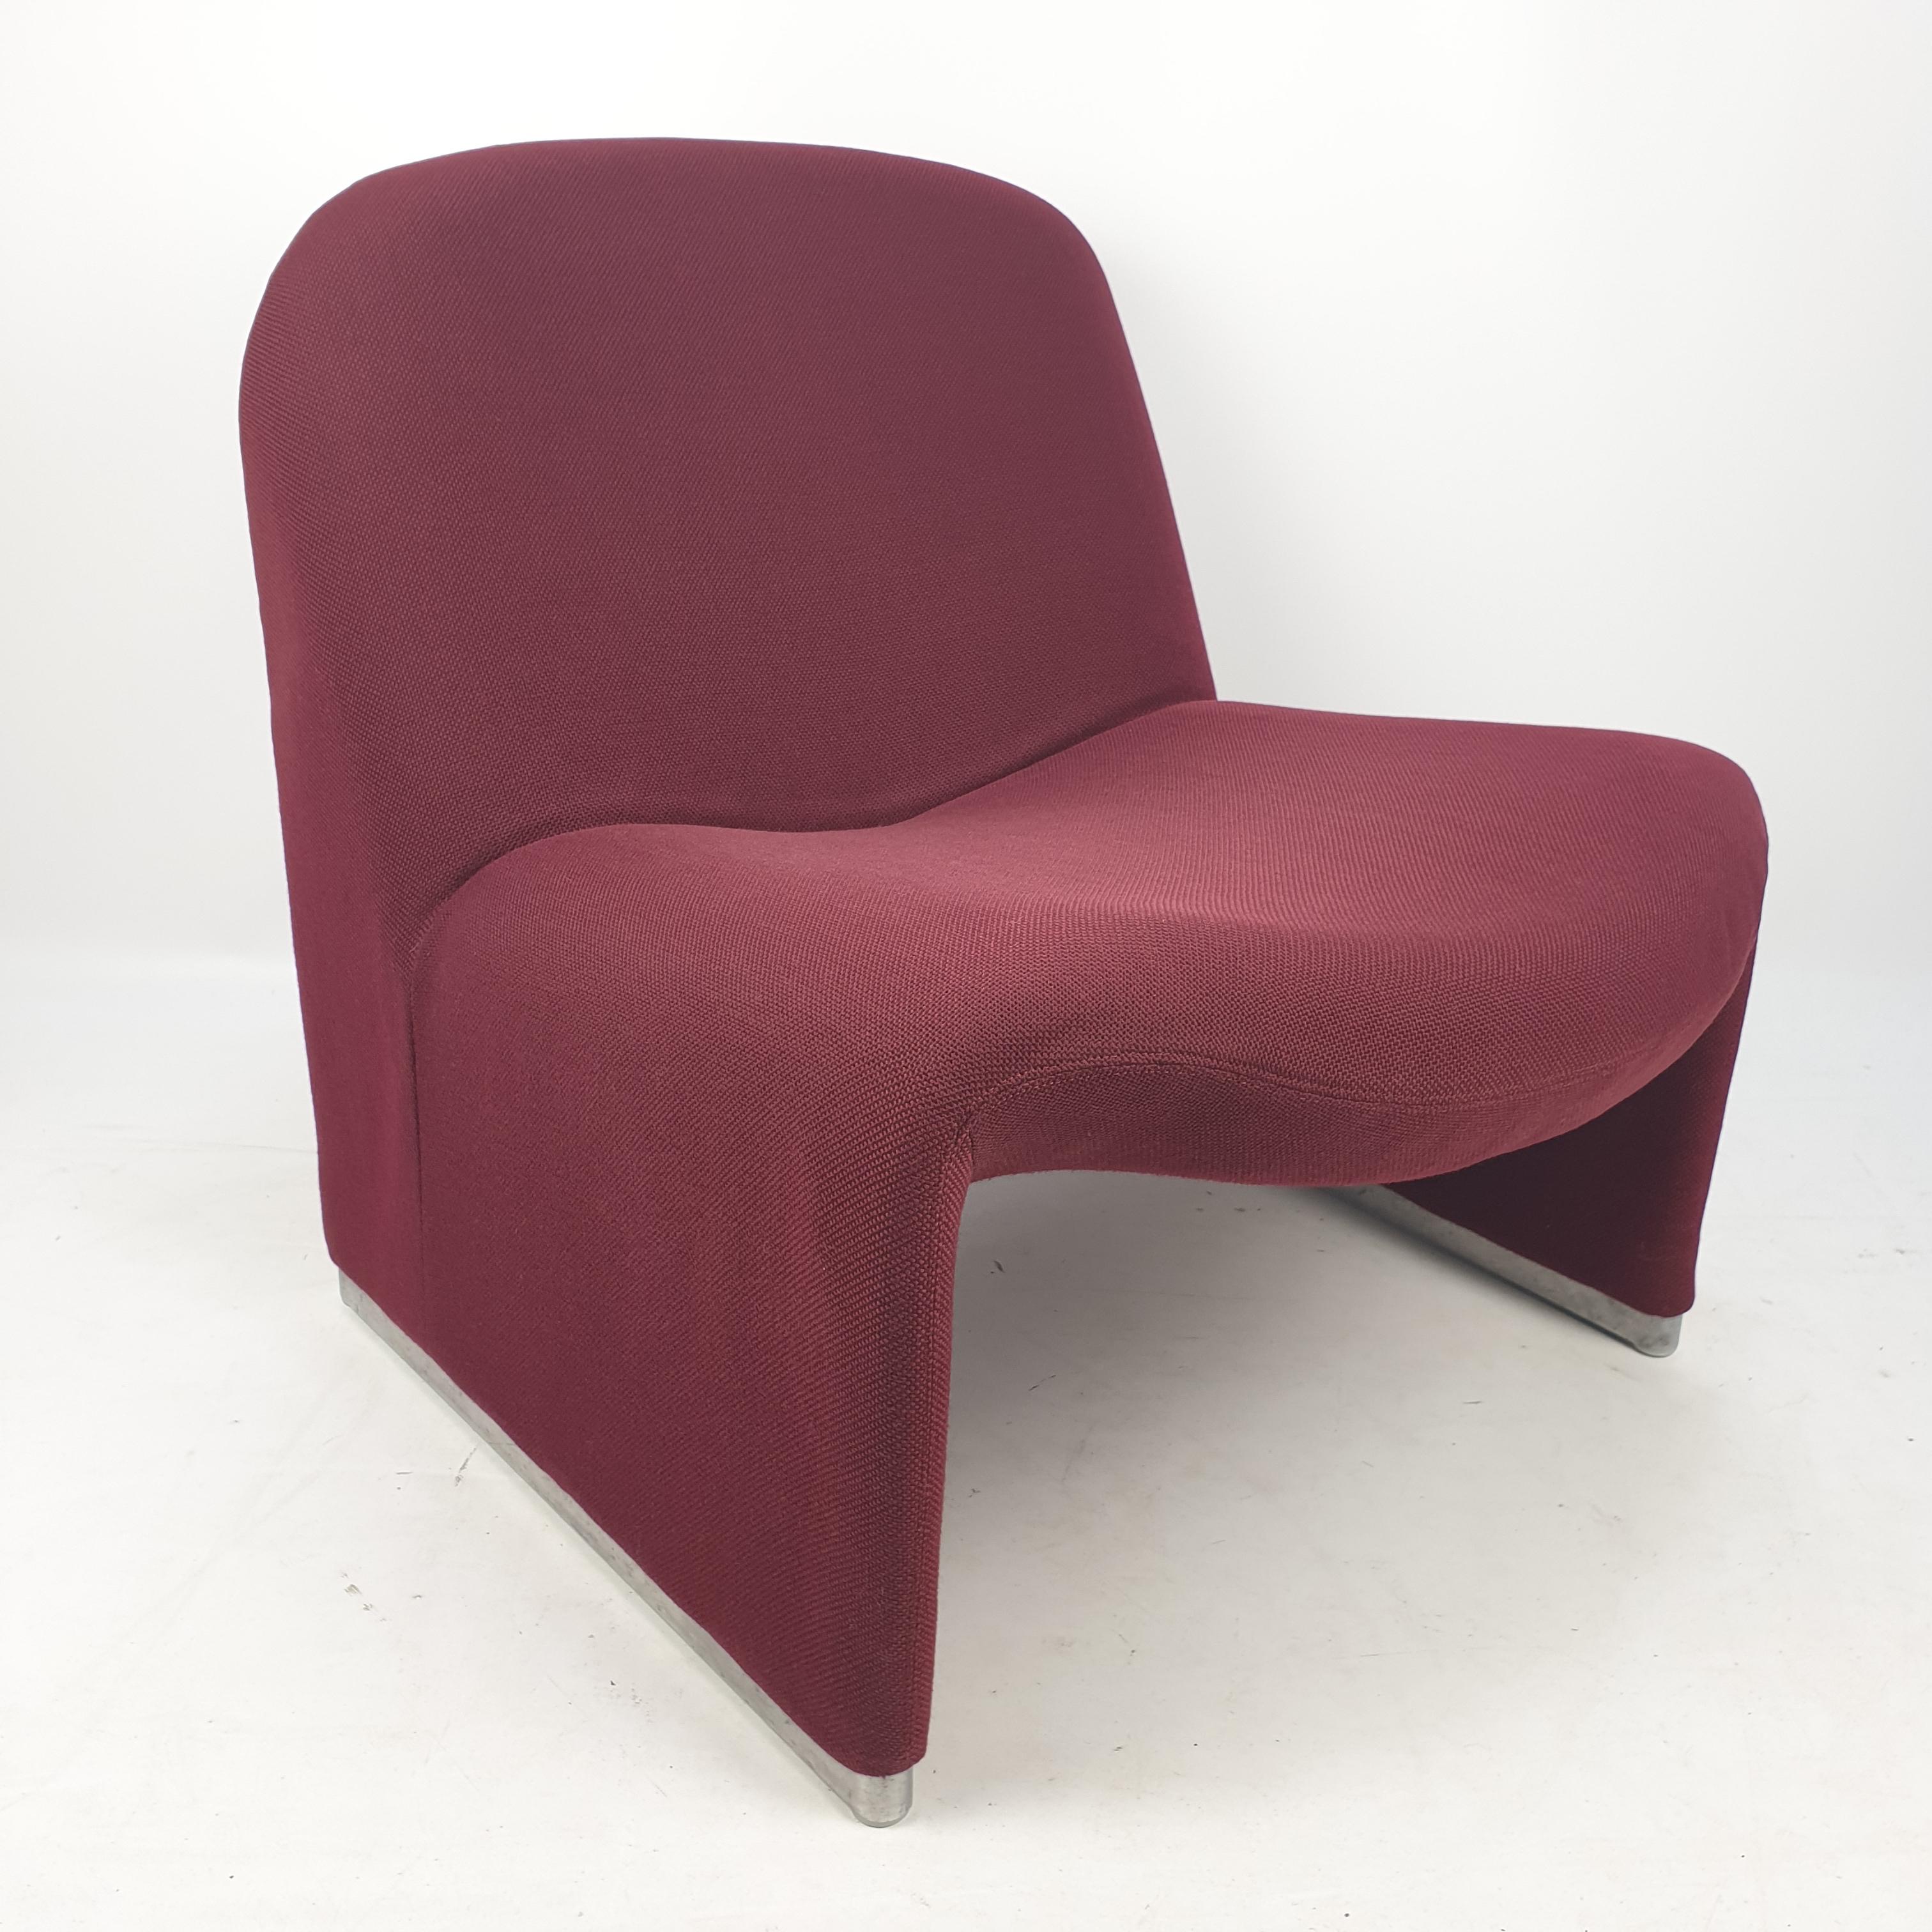 Lovely and comfortable Alky chairs. Designed by Giancarlo Piretti in 1969, produced by Artifort. Original purple wool fabric and aluminum base.
When you put several chairs next to each other it is like a sofa.